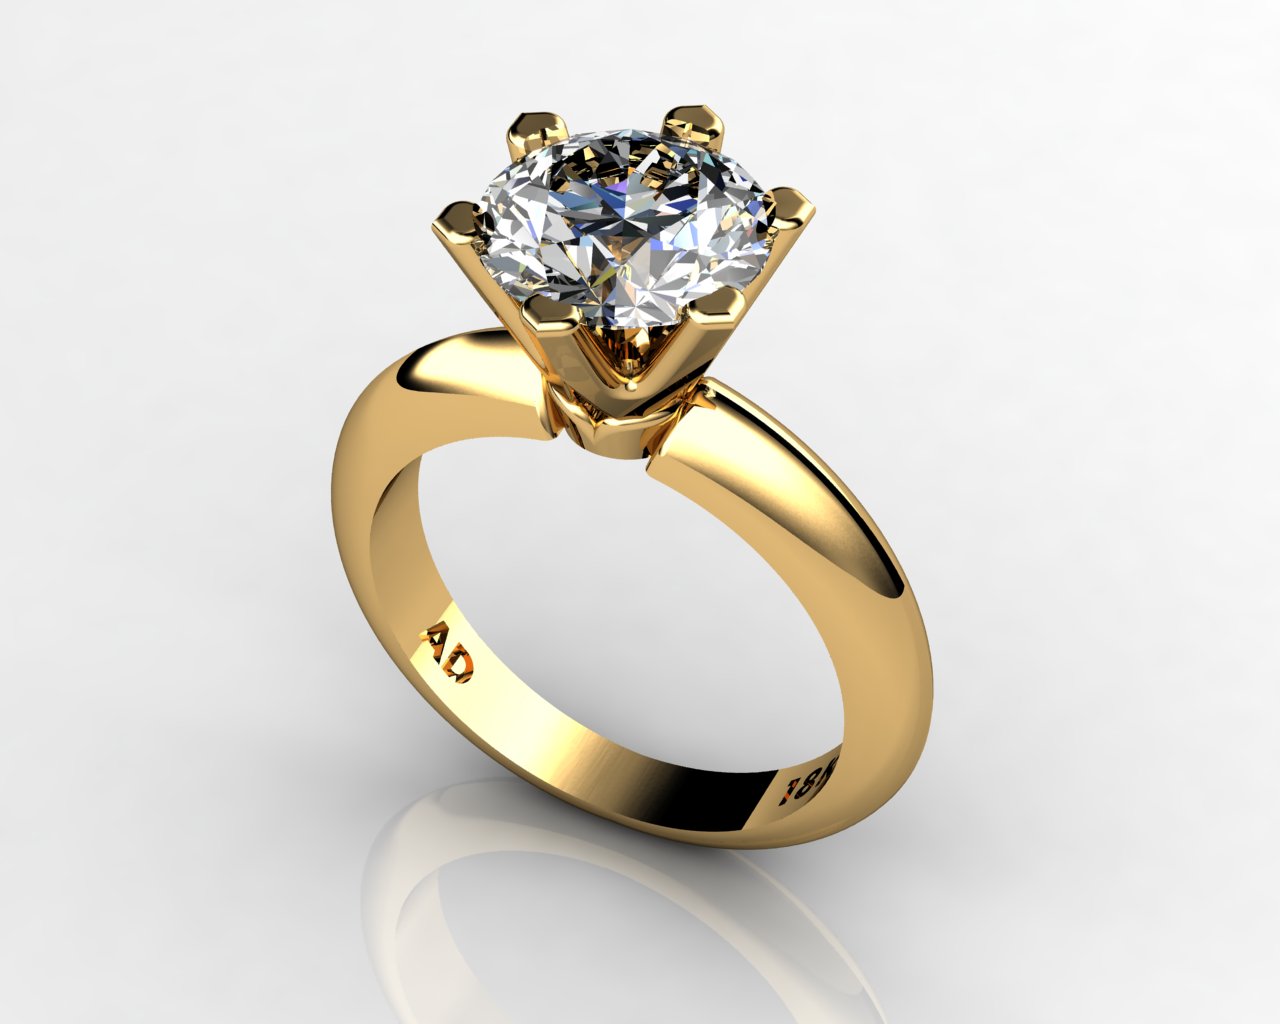 Diamond Solitaire Engagement Ring Round Cut 2.50ct Diamond 6 PRONGS 6gr 18kt Yellow Gold - South Bay Gold Torrance